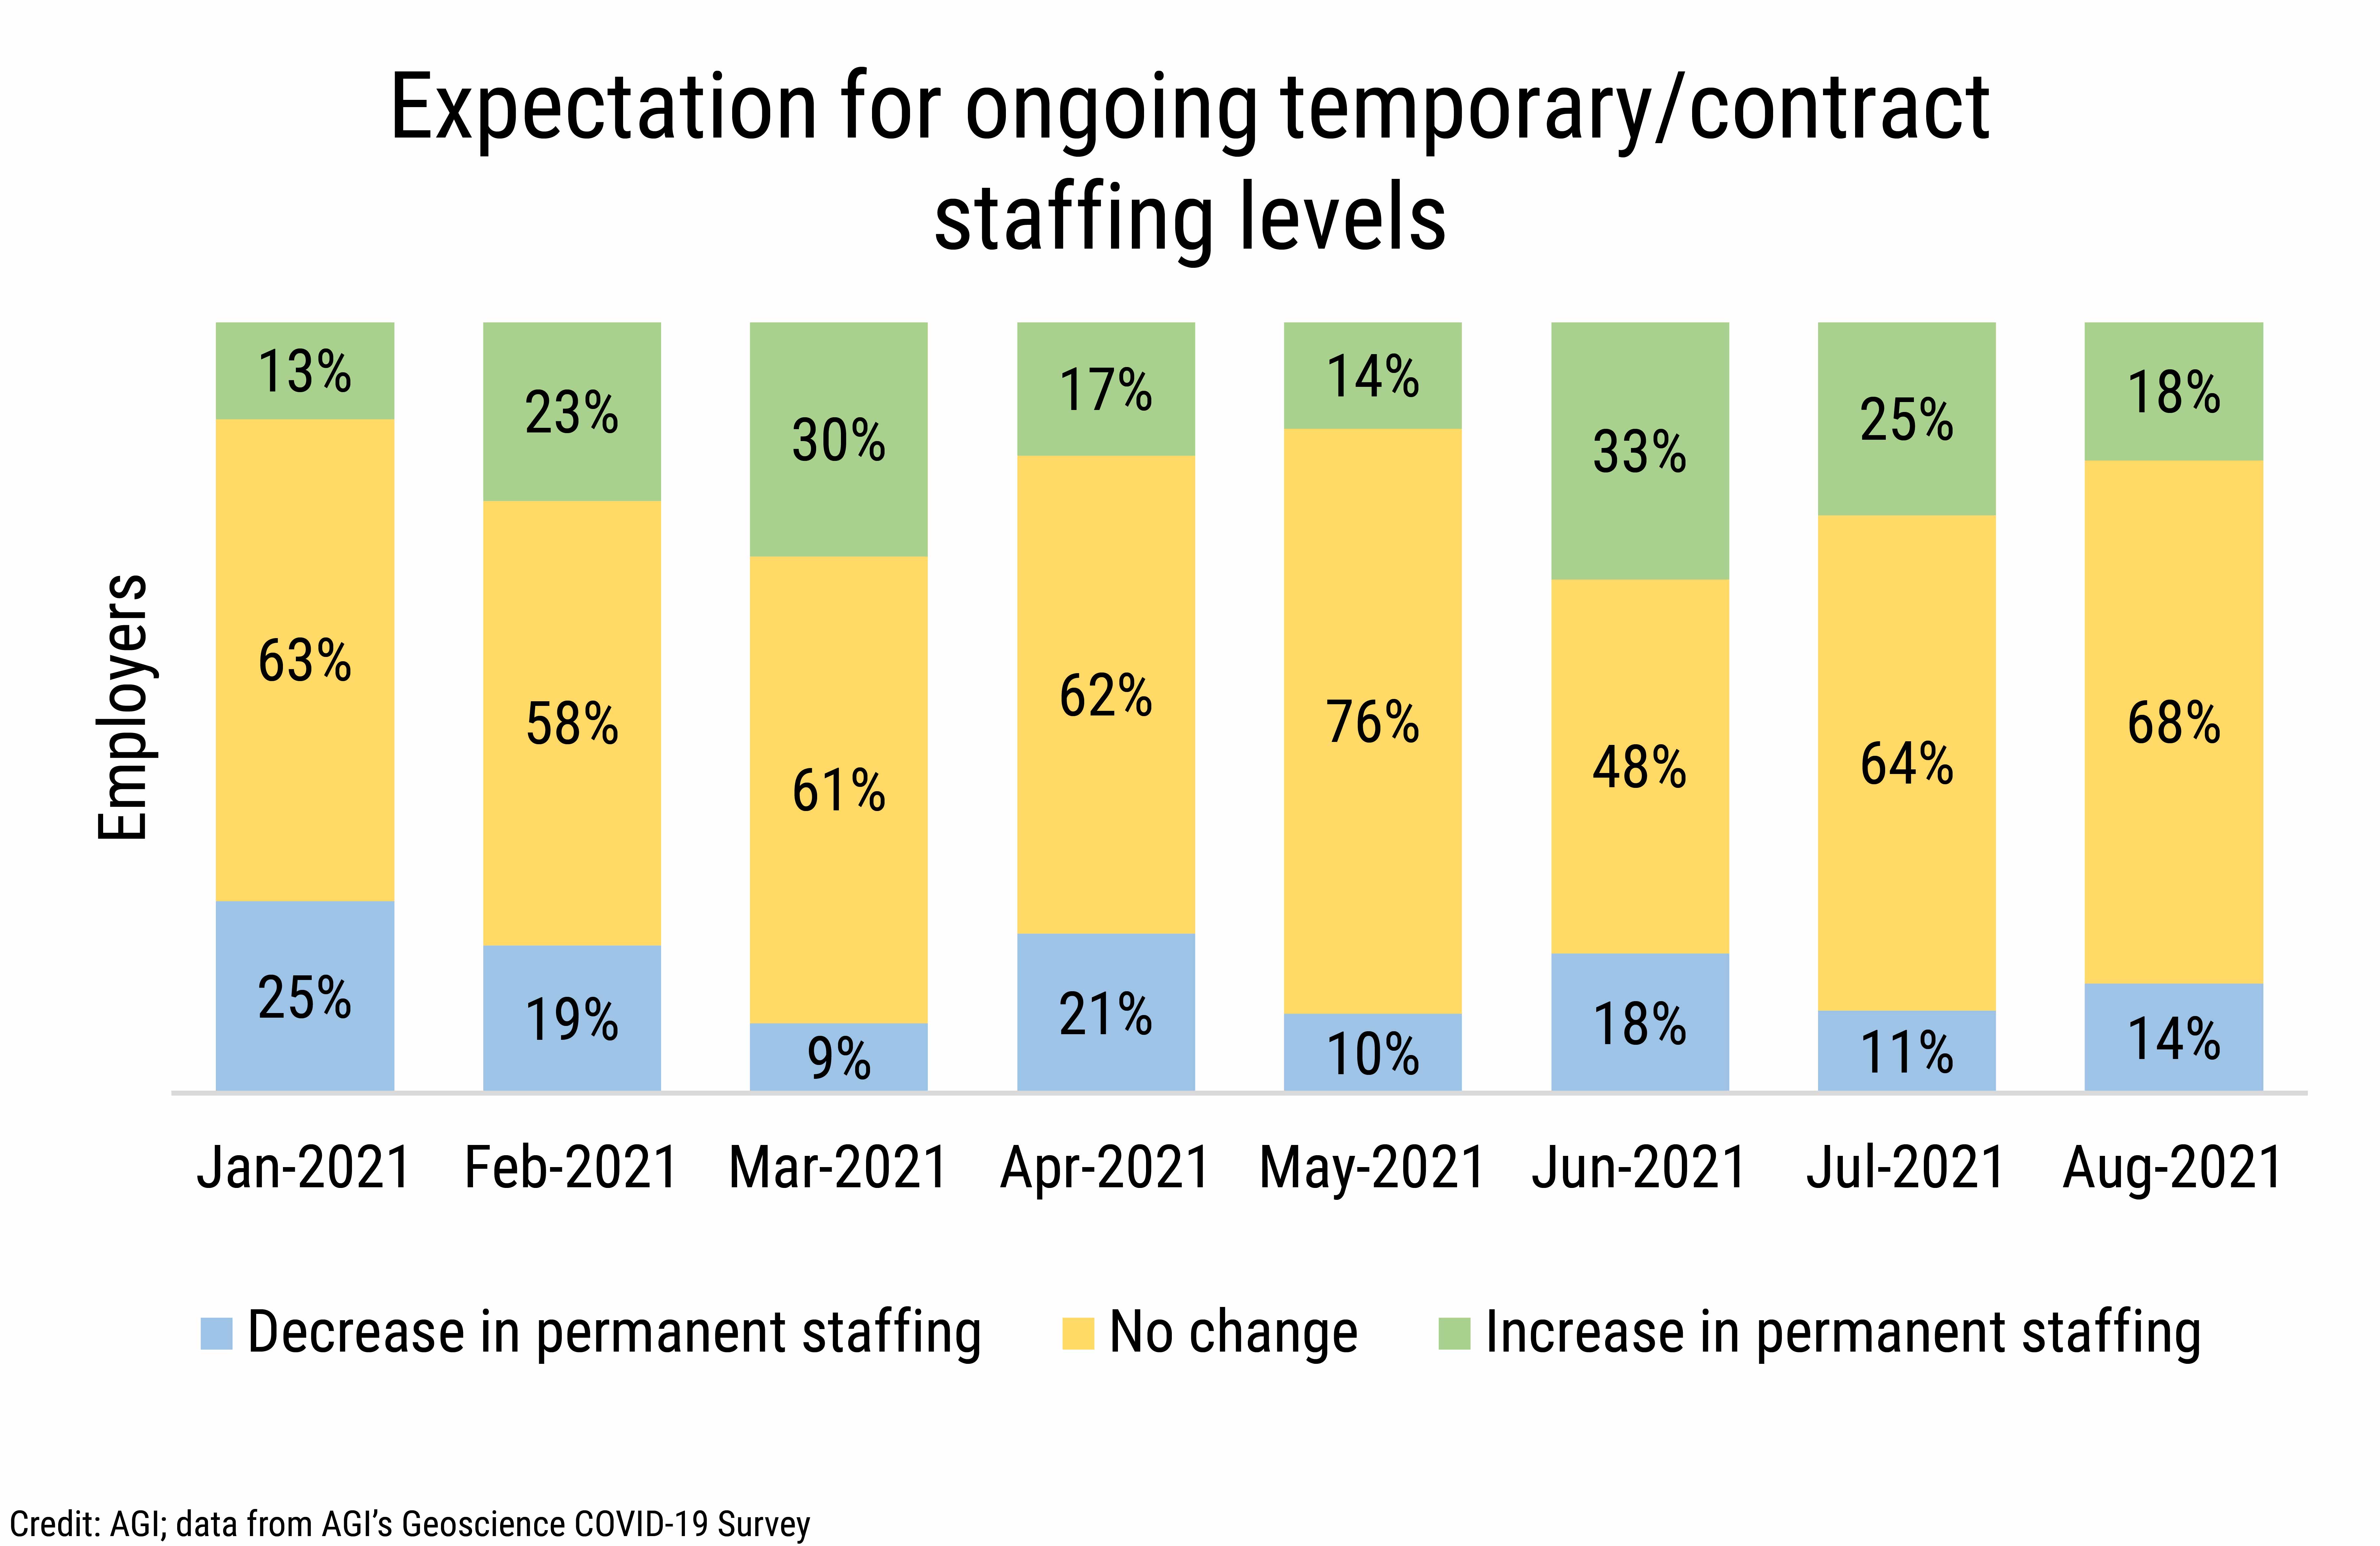 DB_2021-030 chart 02: Expectation for ongoing temporary/contract staffing levels (Credit: AGI; data from AGI's Geoscience COVID-19 Survey)